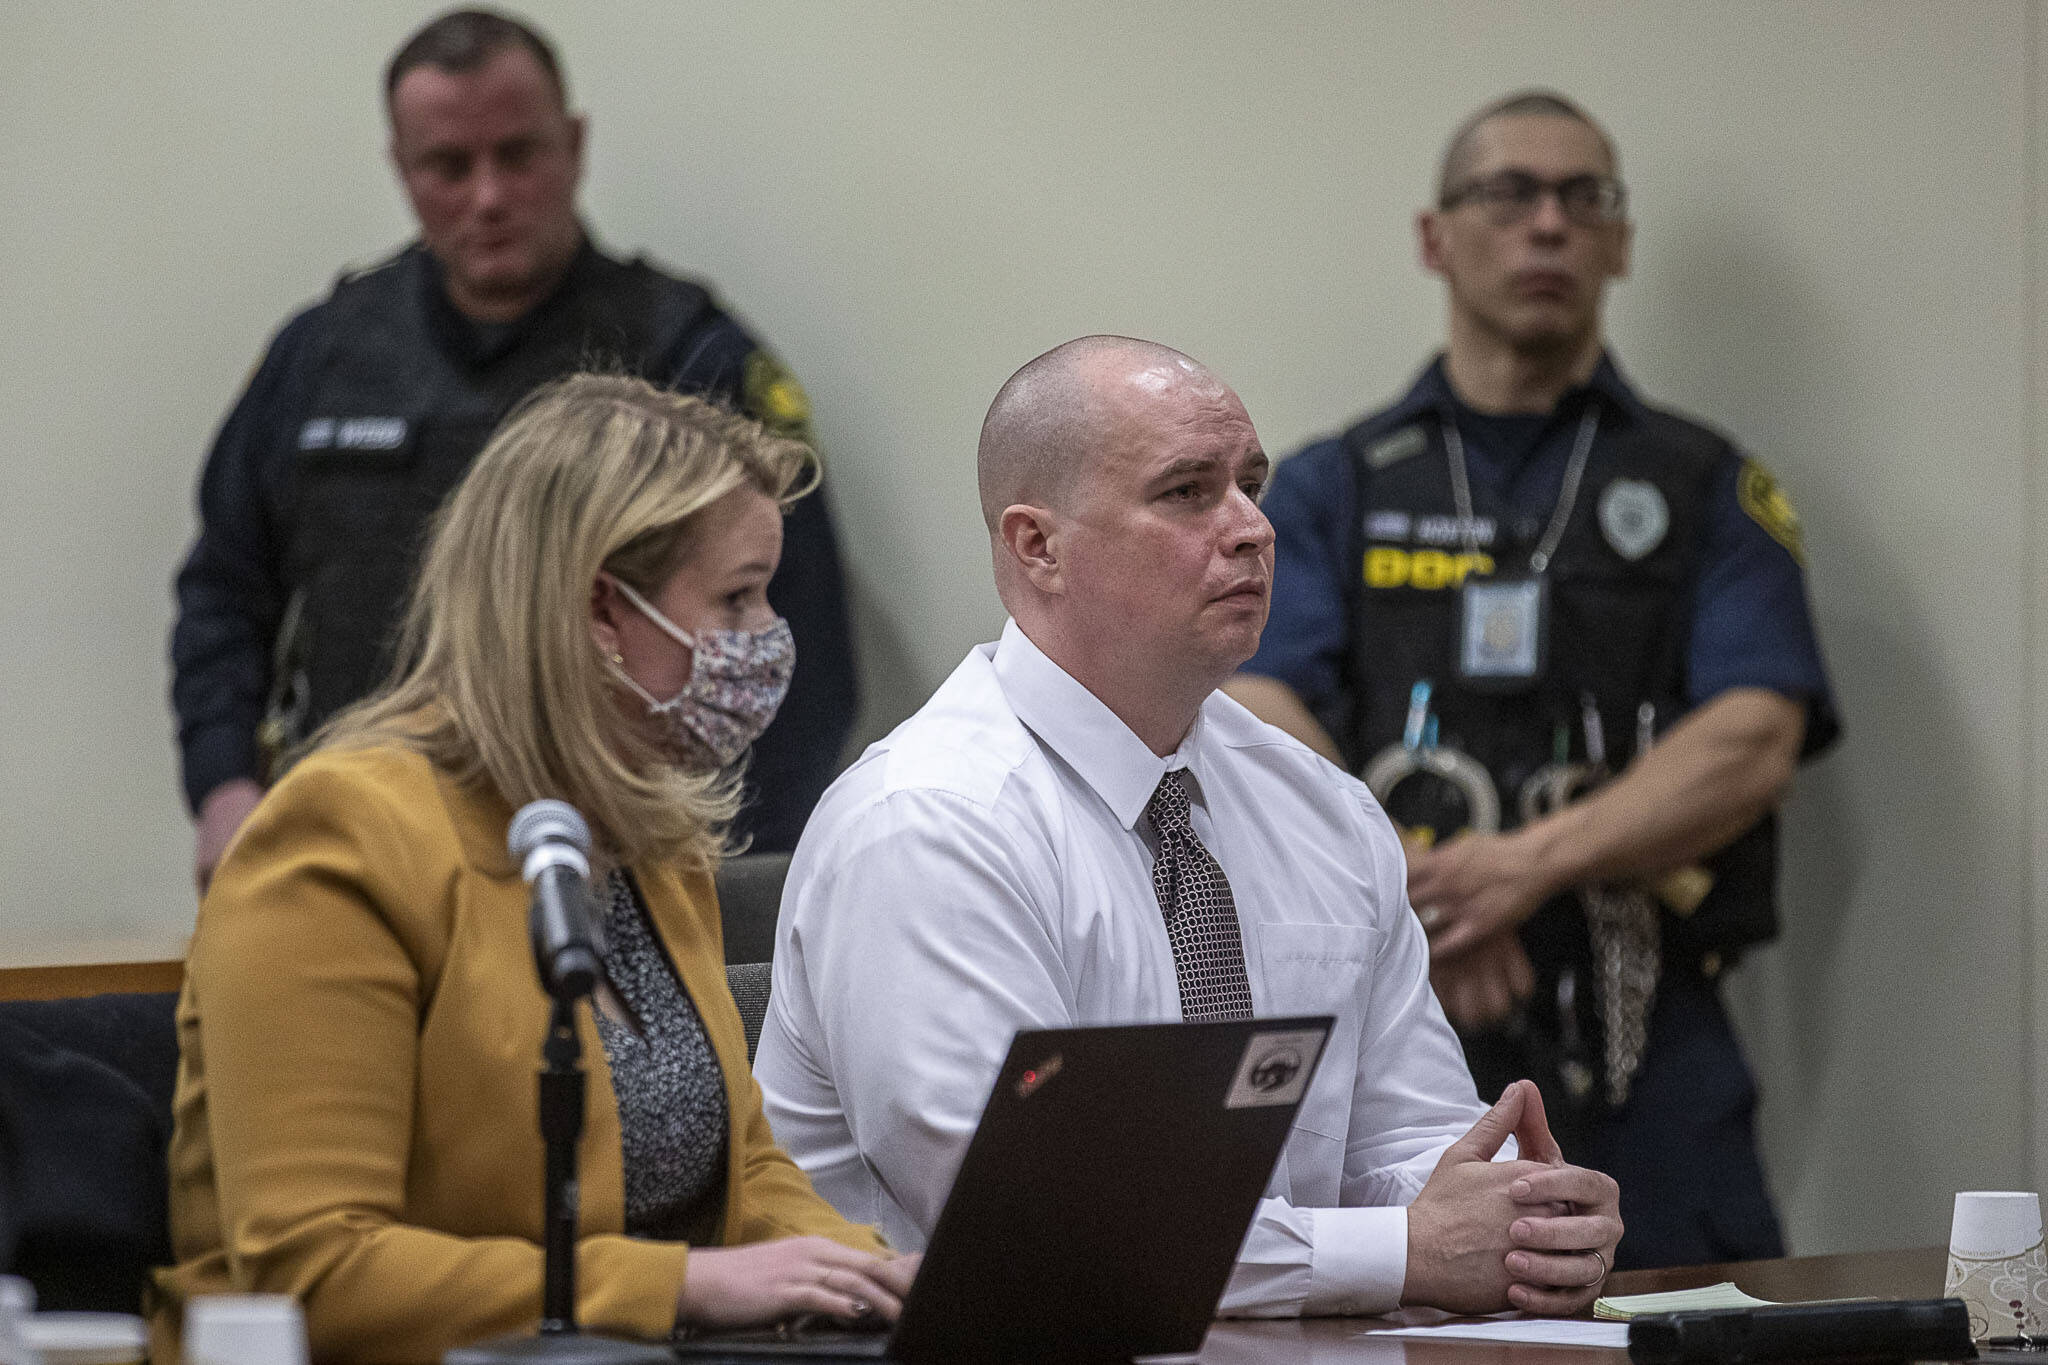 Brandon White listens during his resentencing hearing at the Snohomish County Courthouse on Friday, Feb. 24 in Everett. (Annie Barker / The Herald)